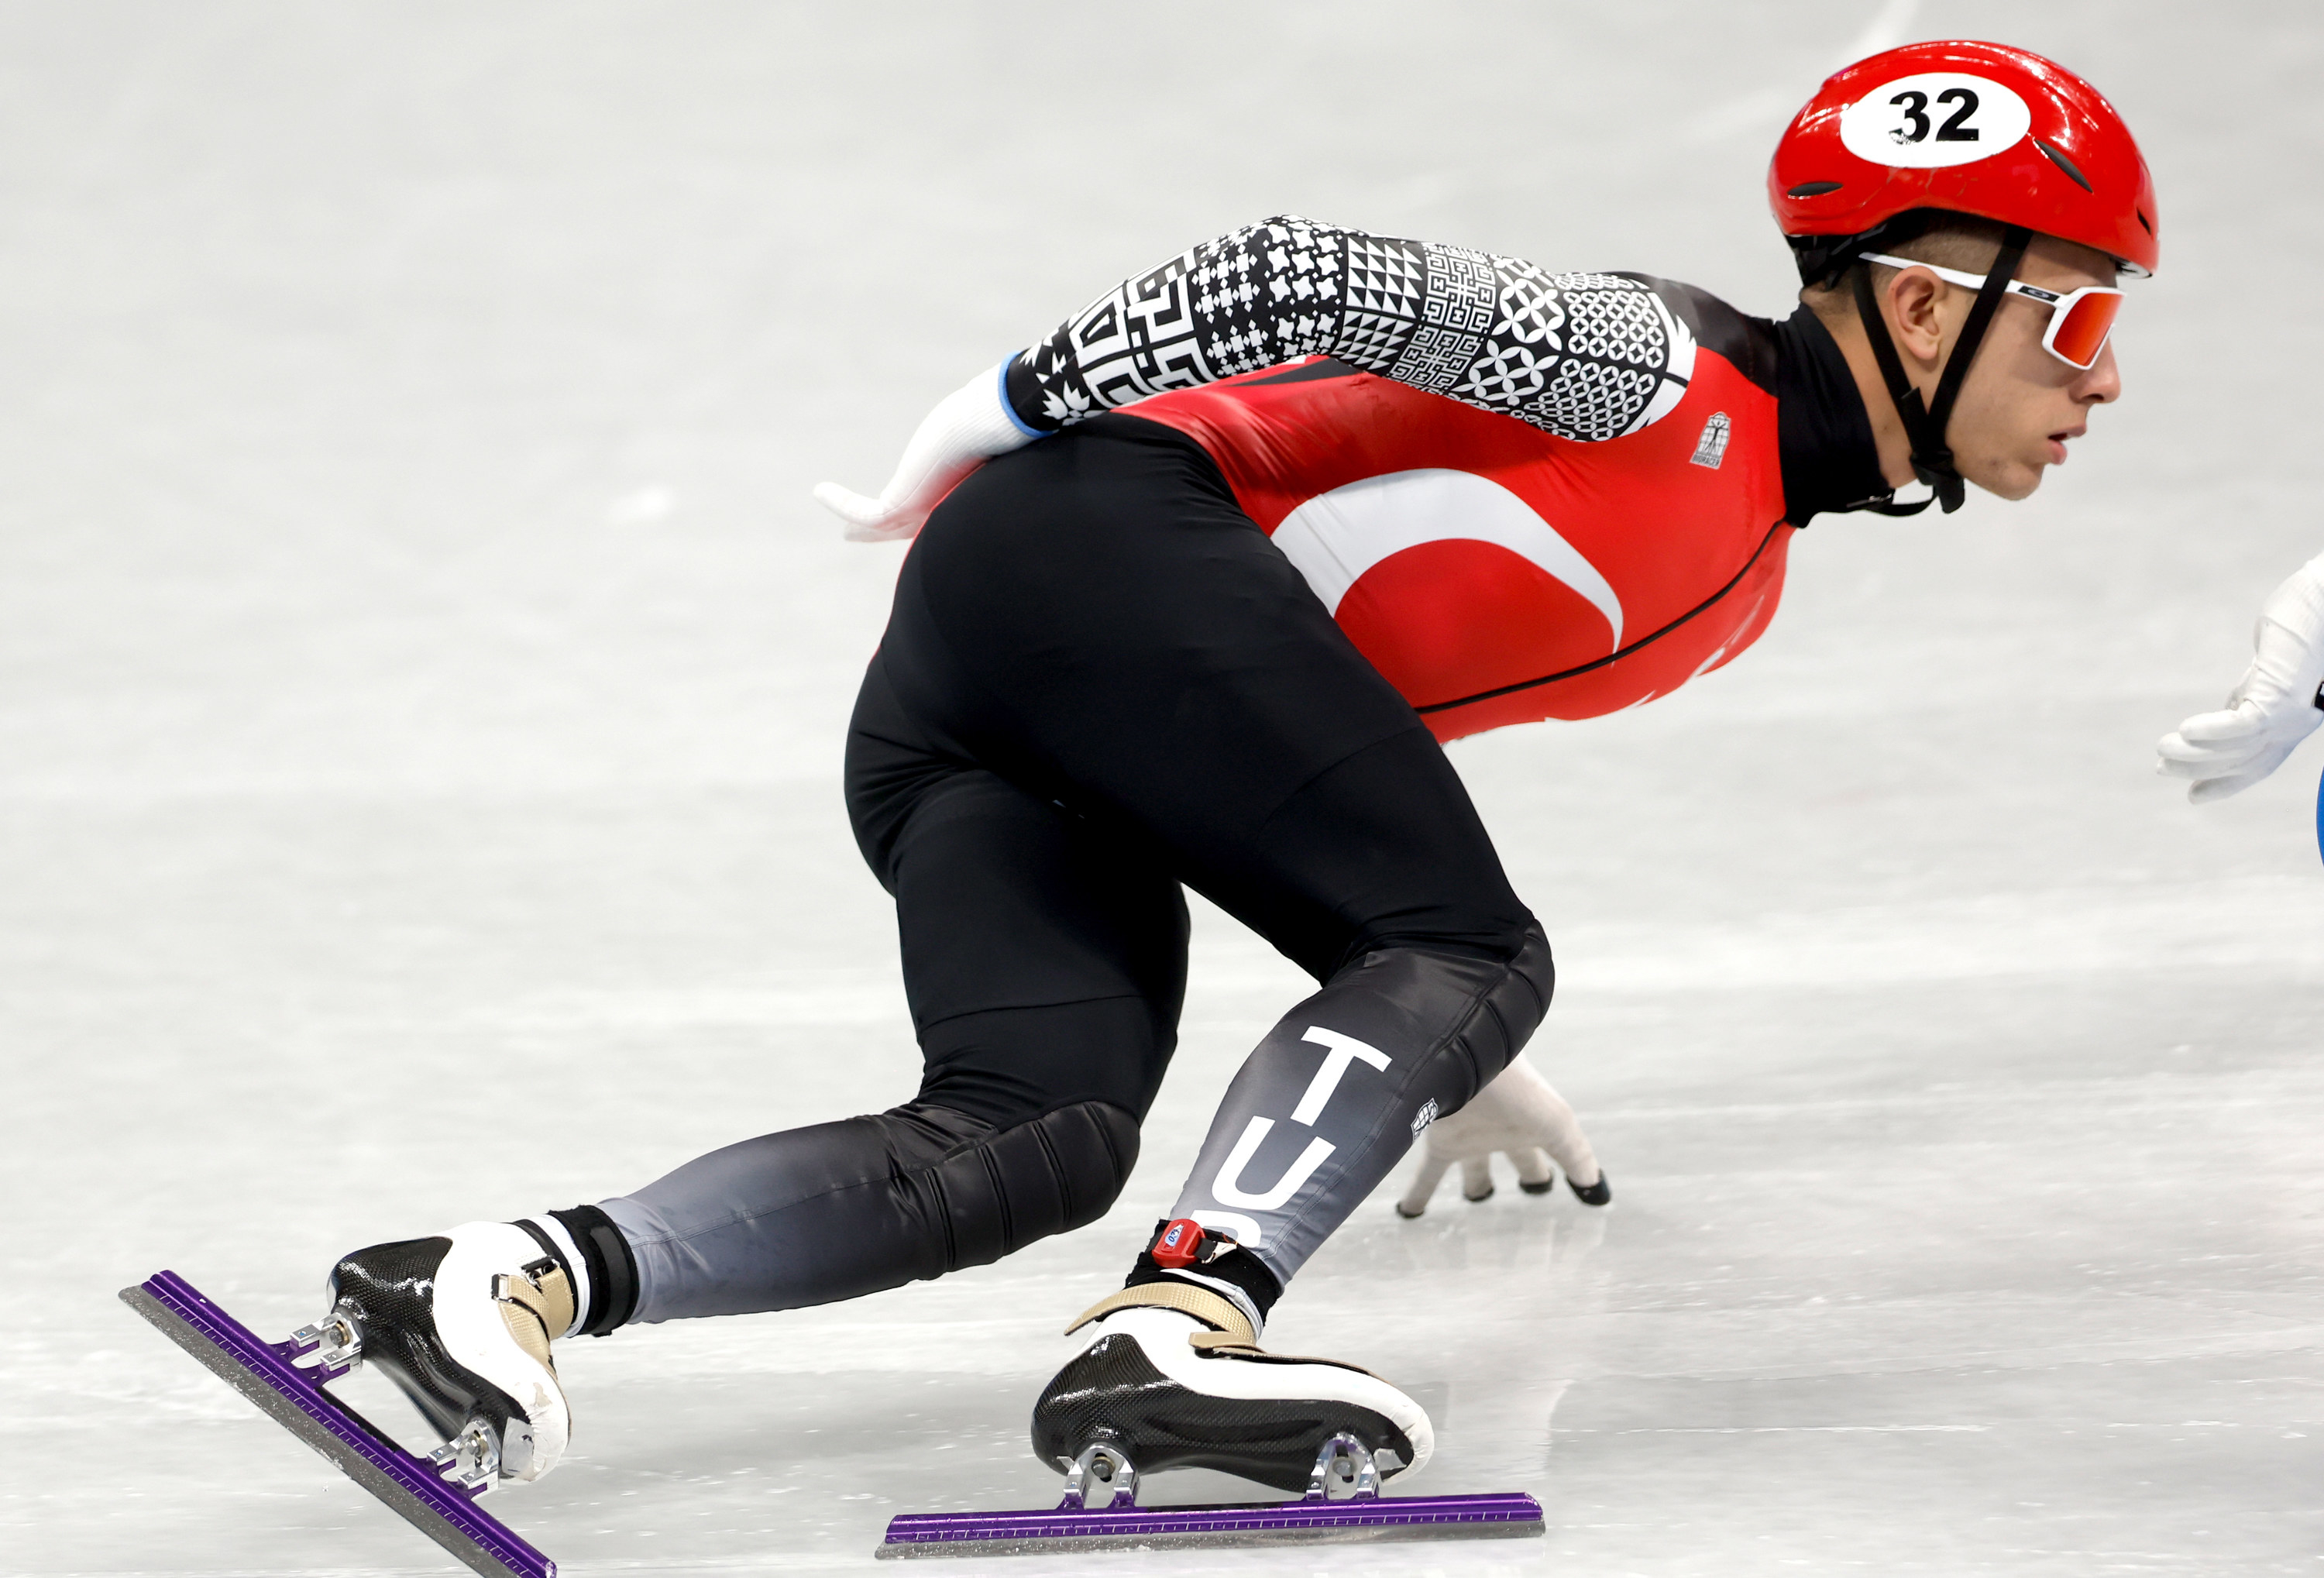 A Turkish athlete participating in speed skating